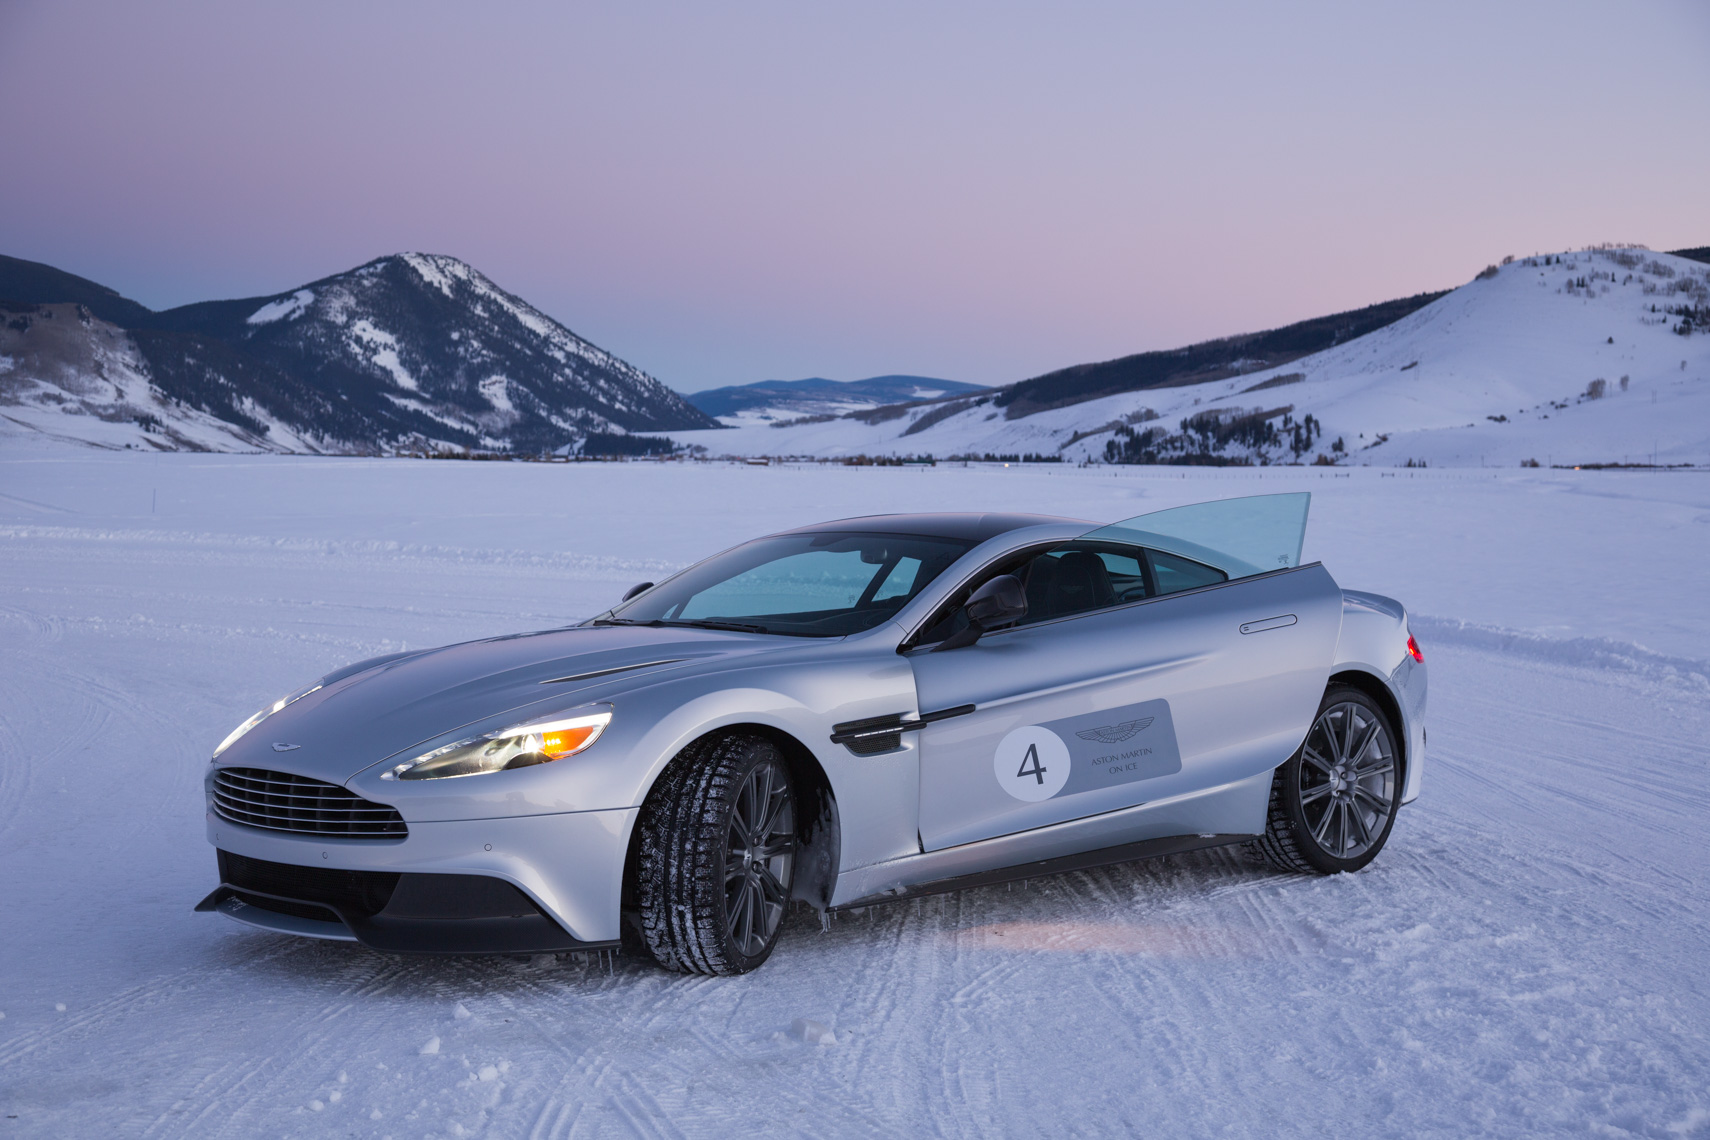 The Aston Martin On Ice Driving Experience in Crested Butte, Colorado.